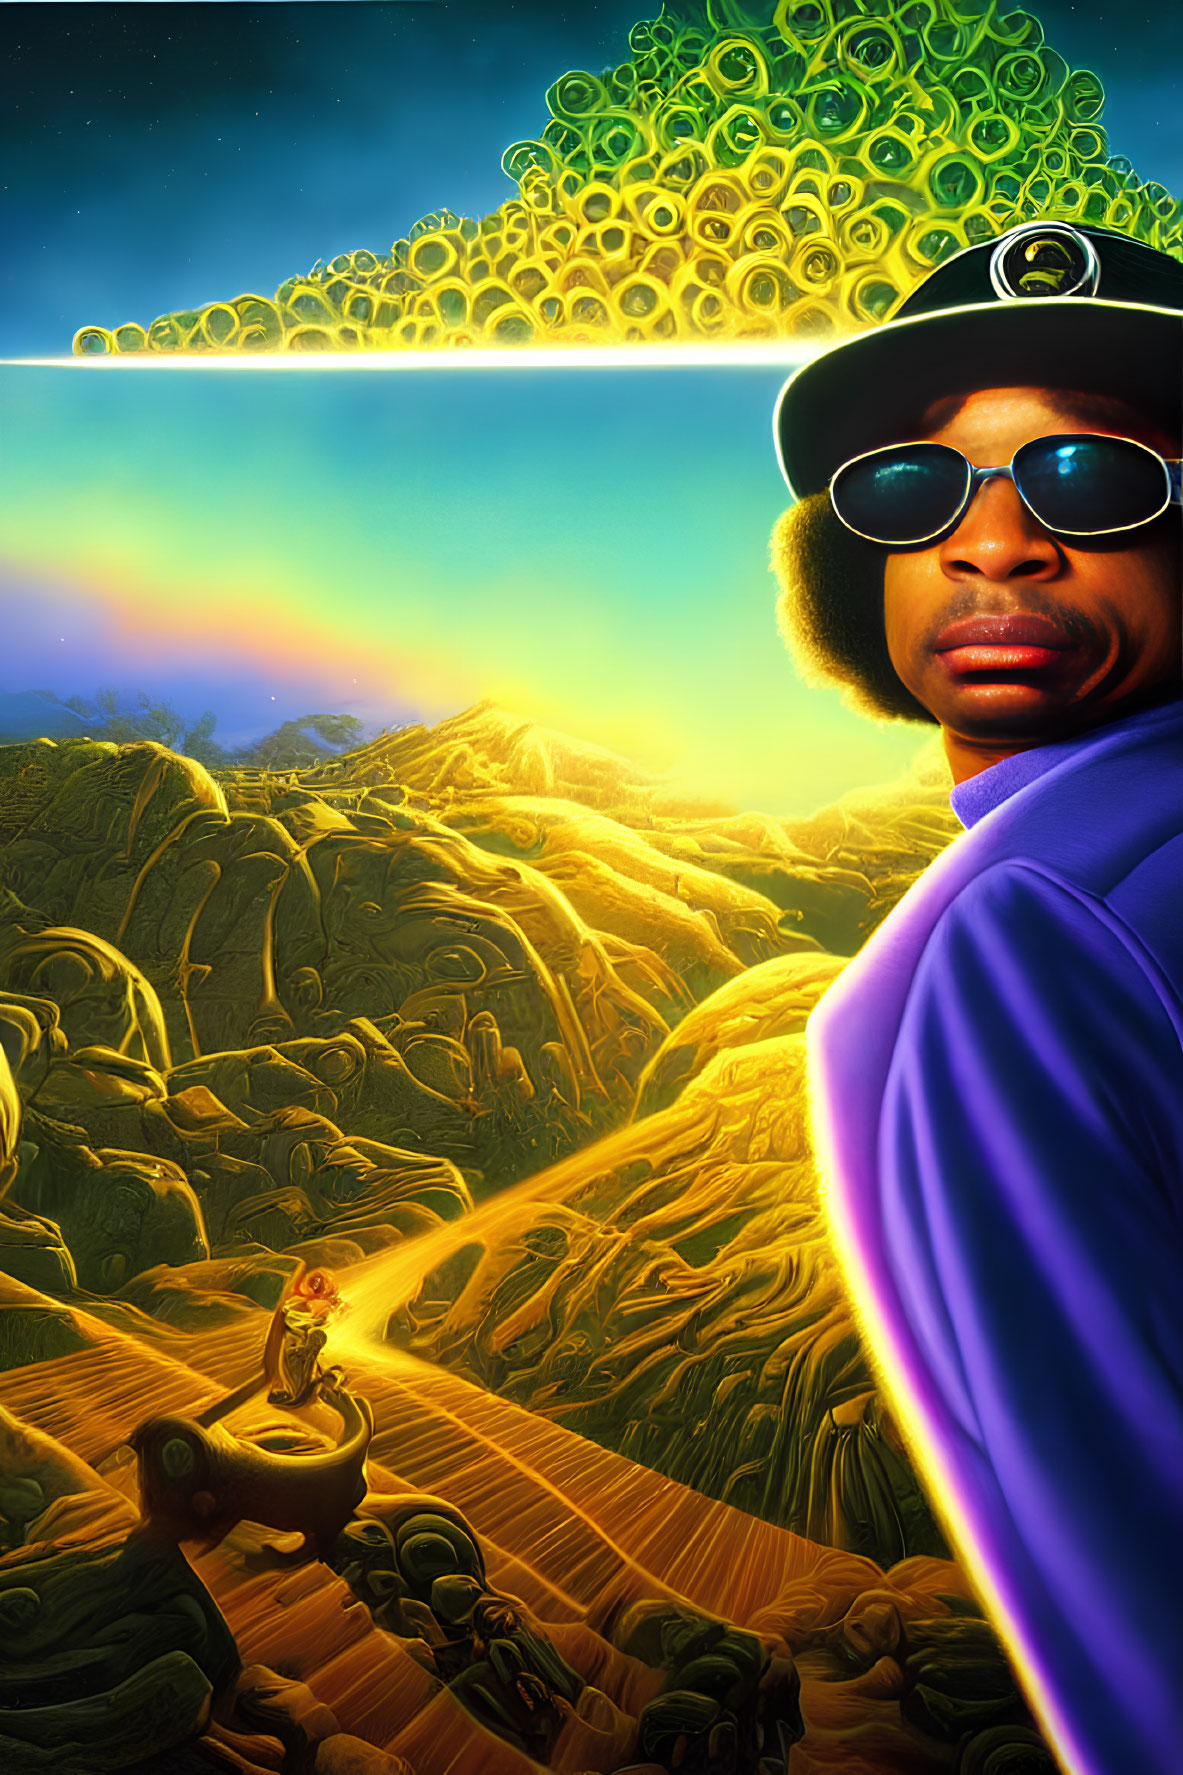 Person in Purple Jacket and Sunglasses with Monkey in Otherworldly Landscape